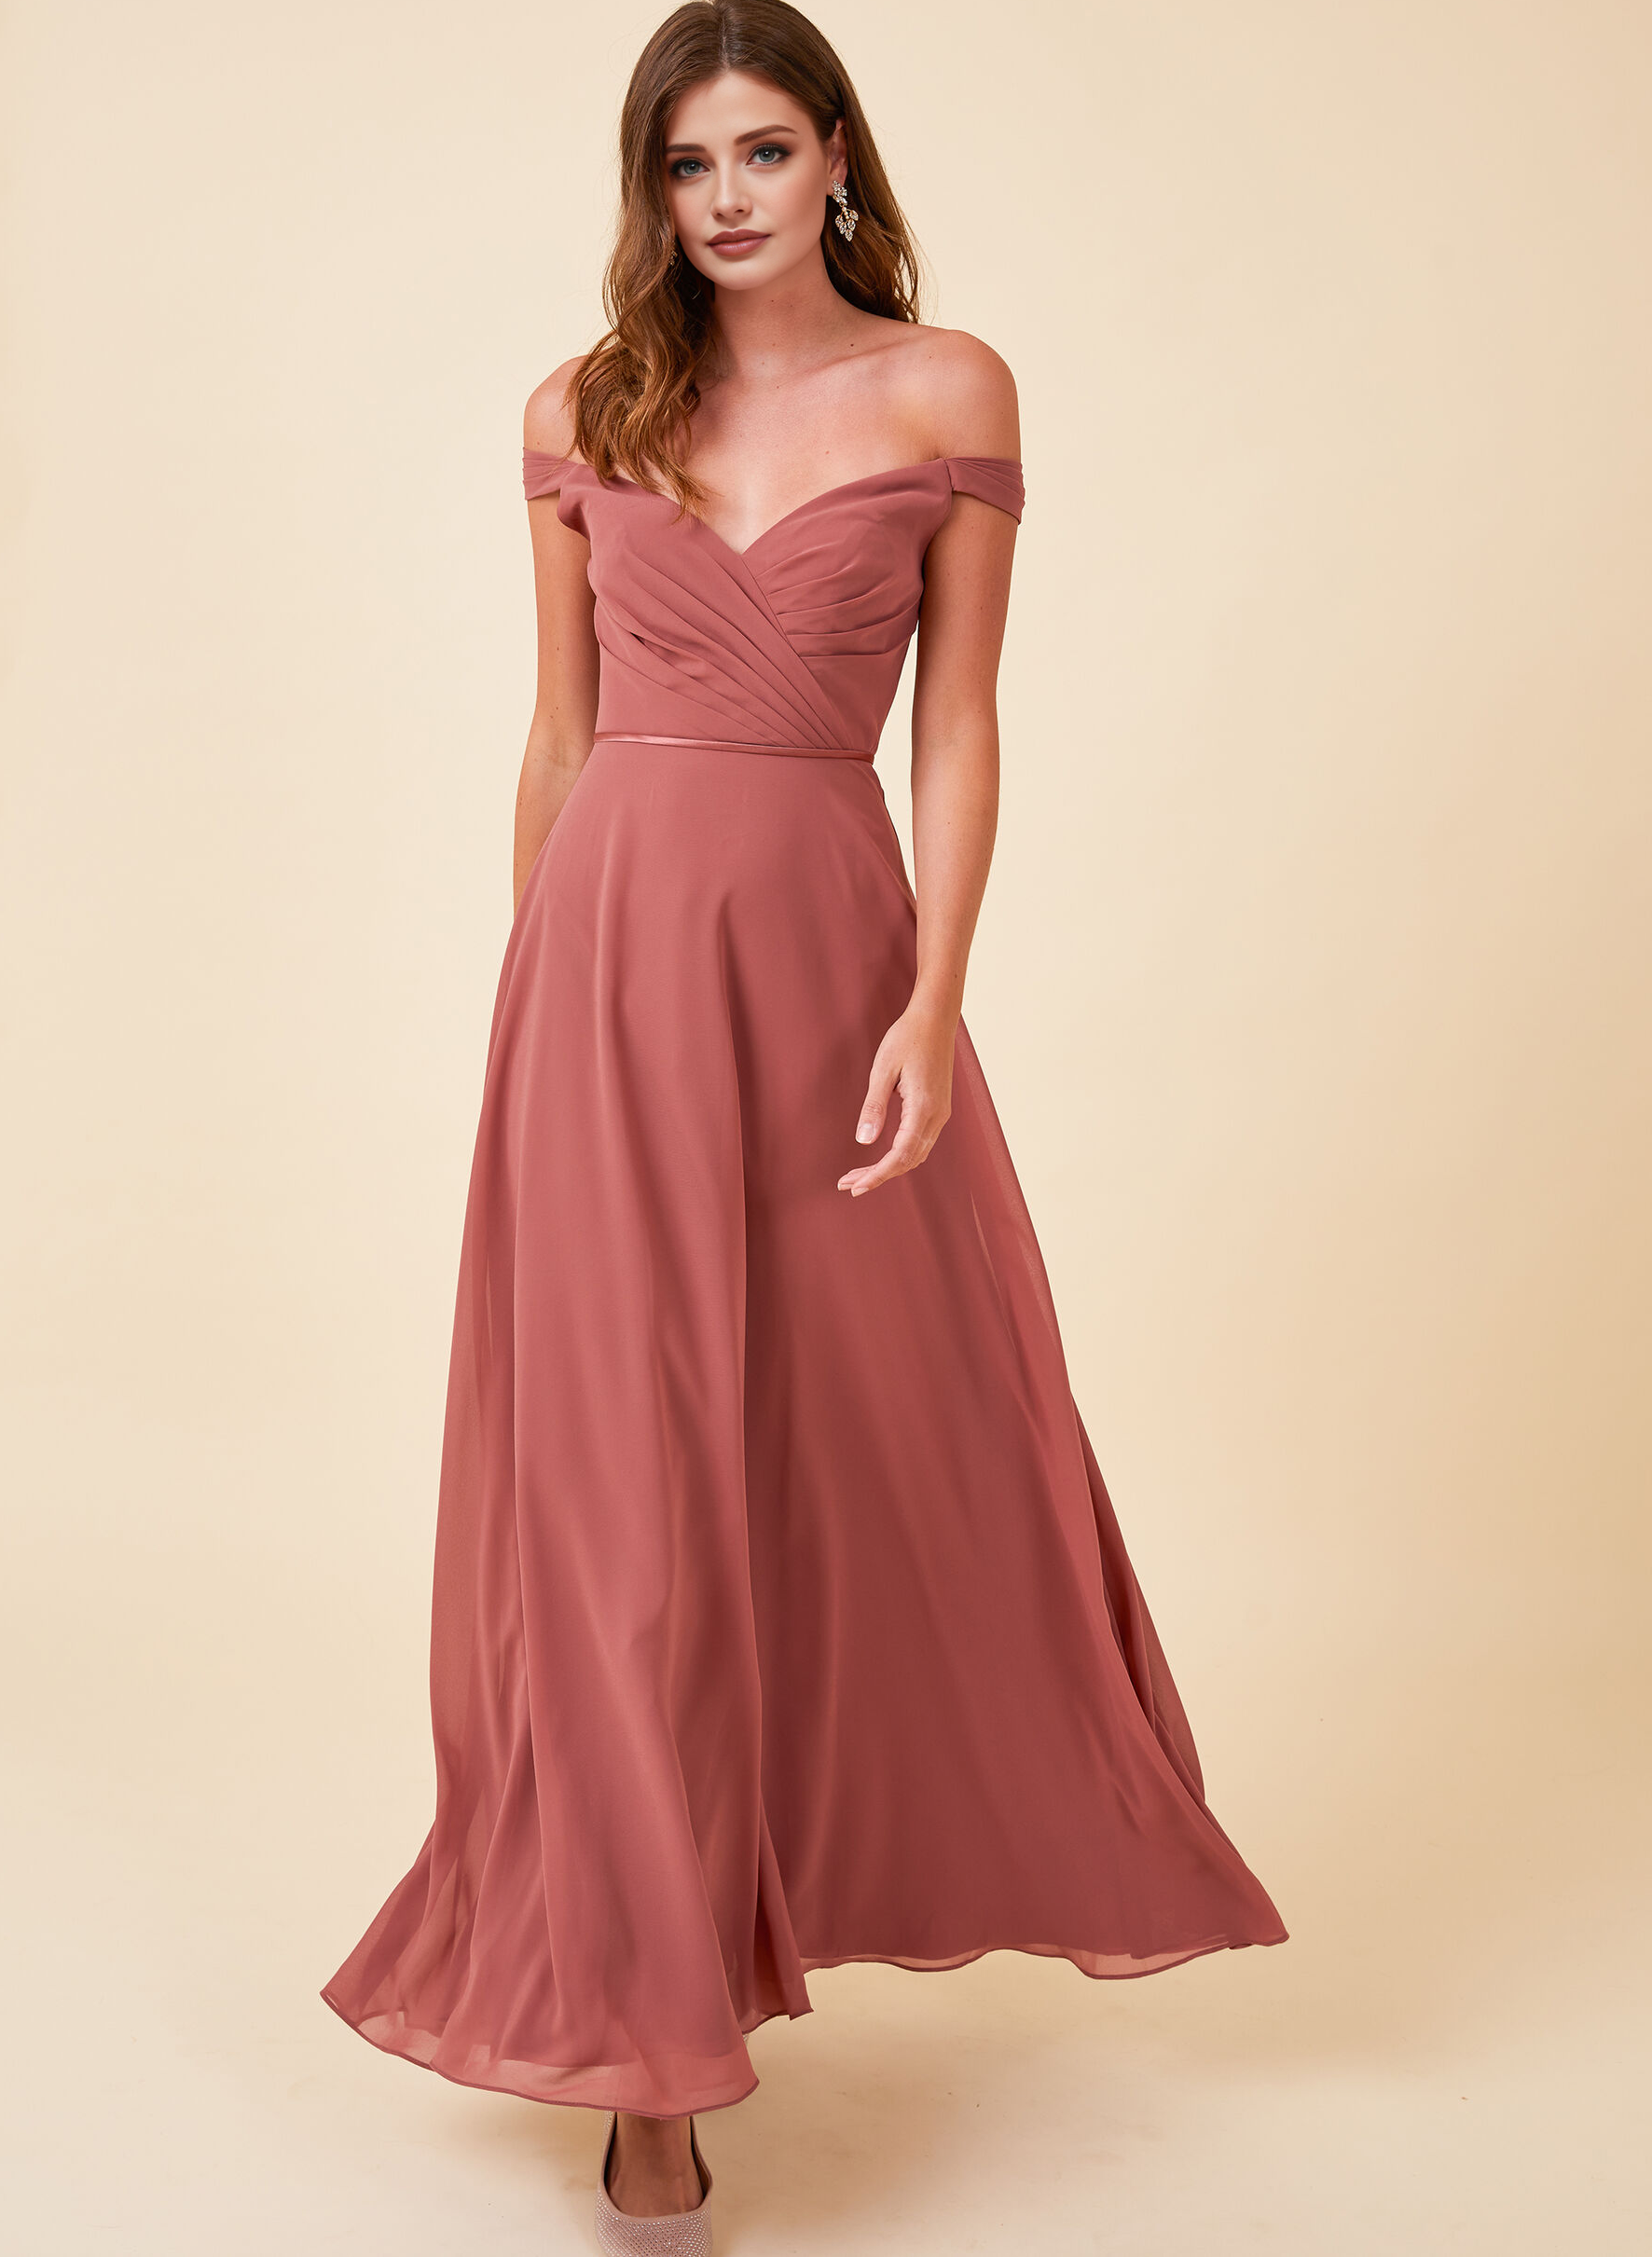 A-Line Rose Off-The-Shoulder Bridesmaid Dresses With Chiffon